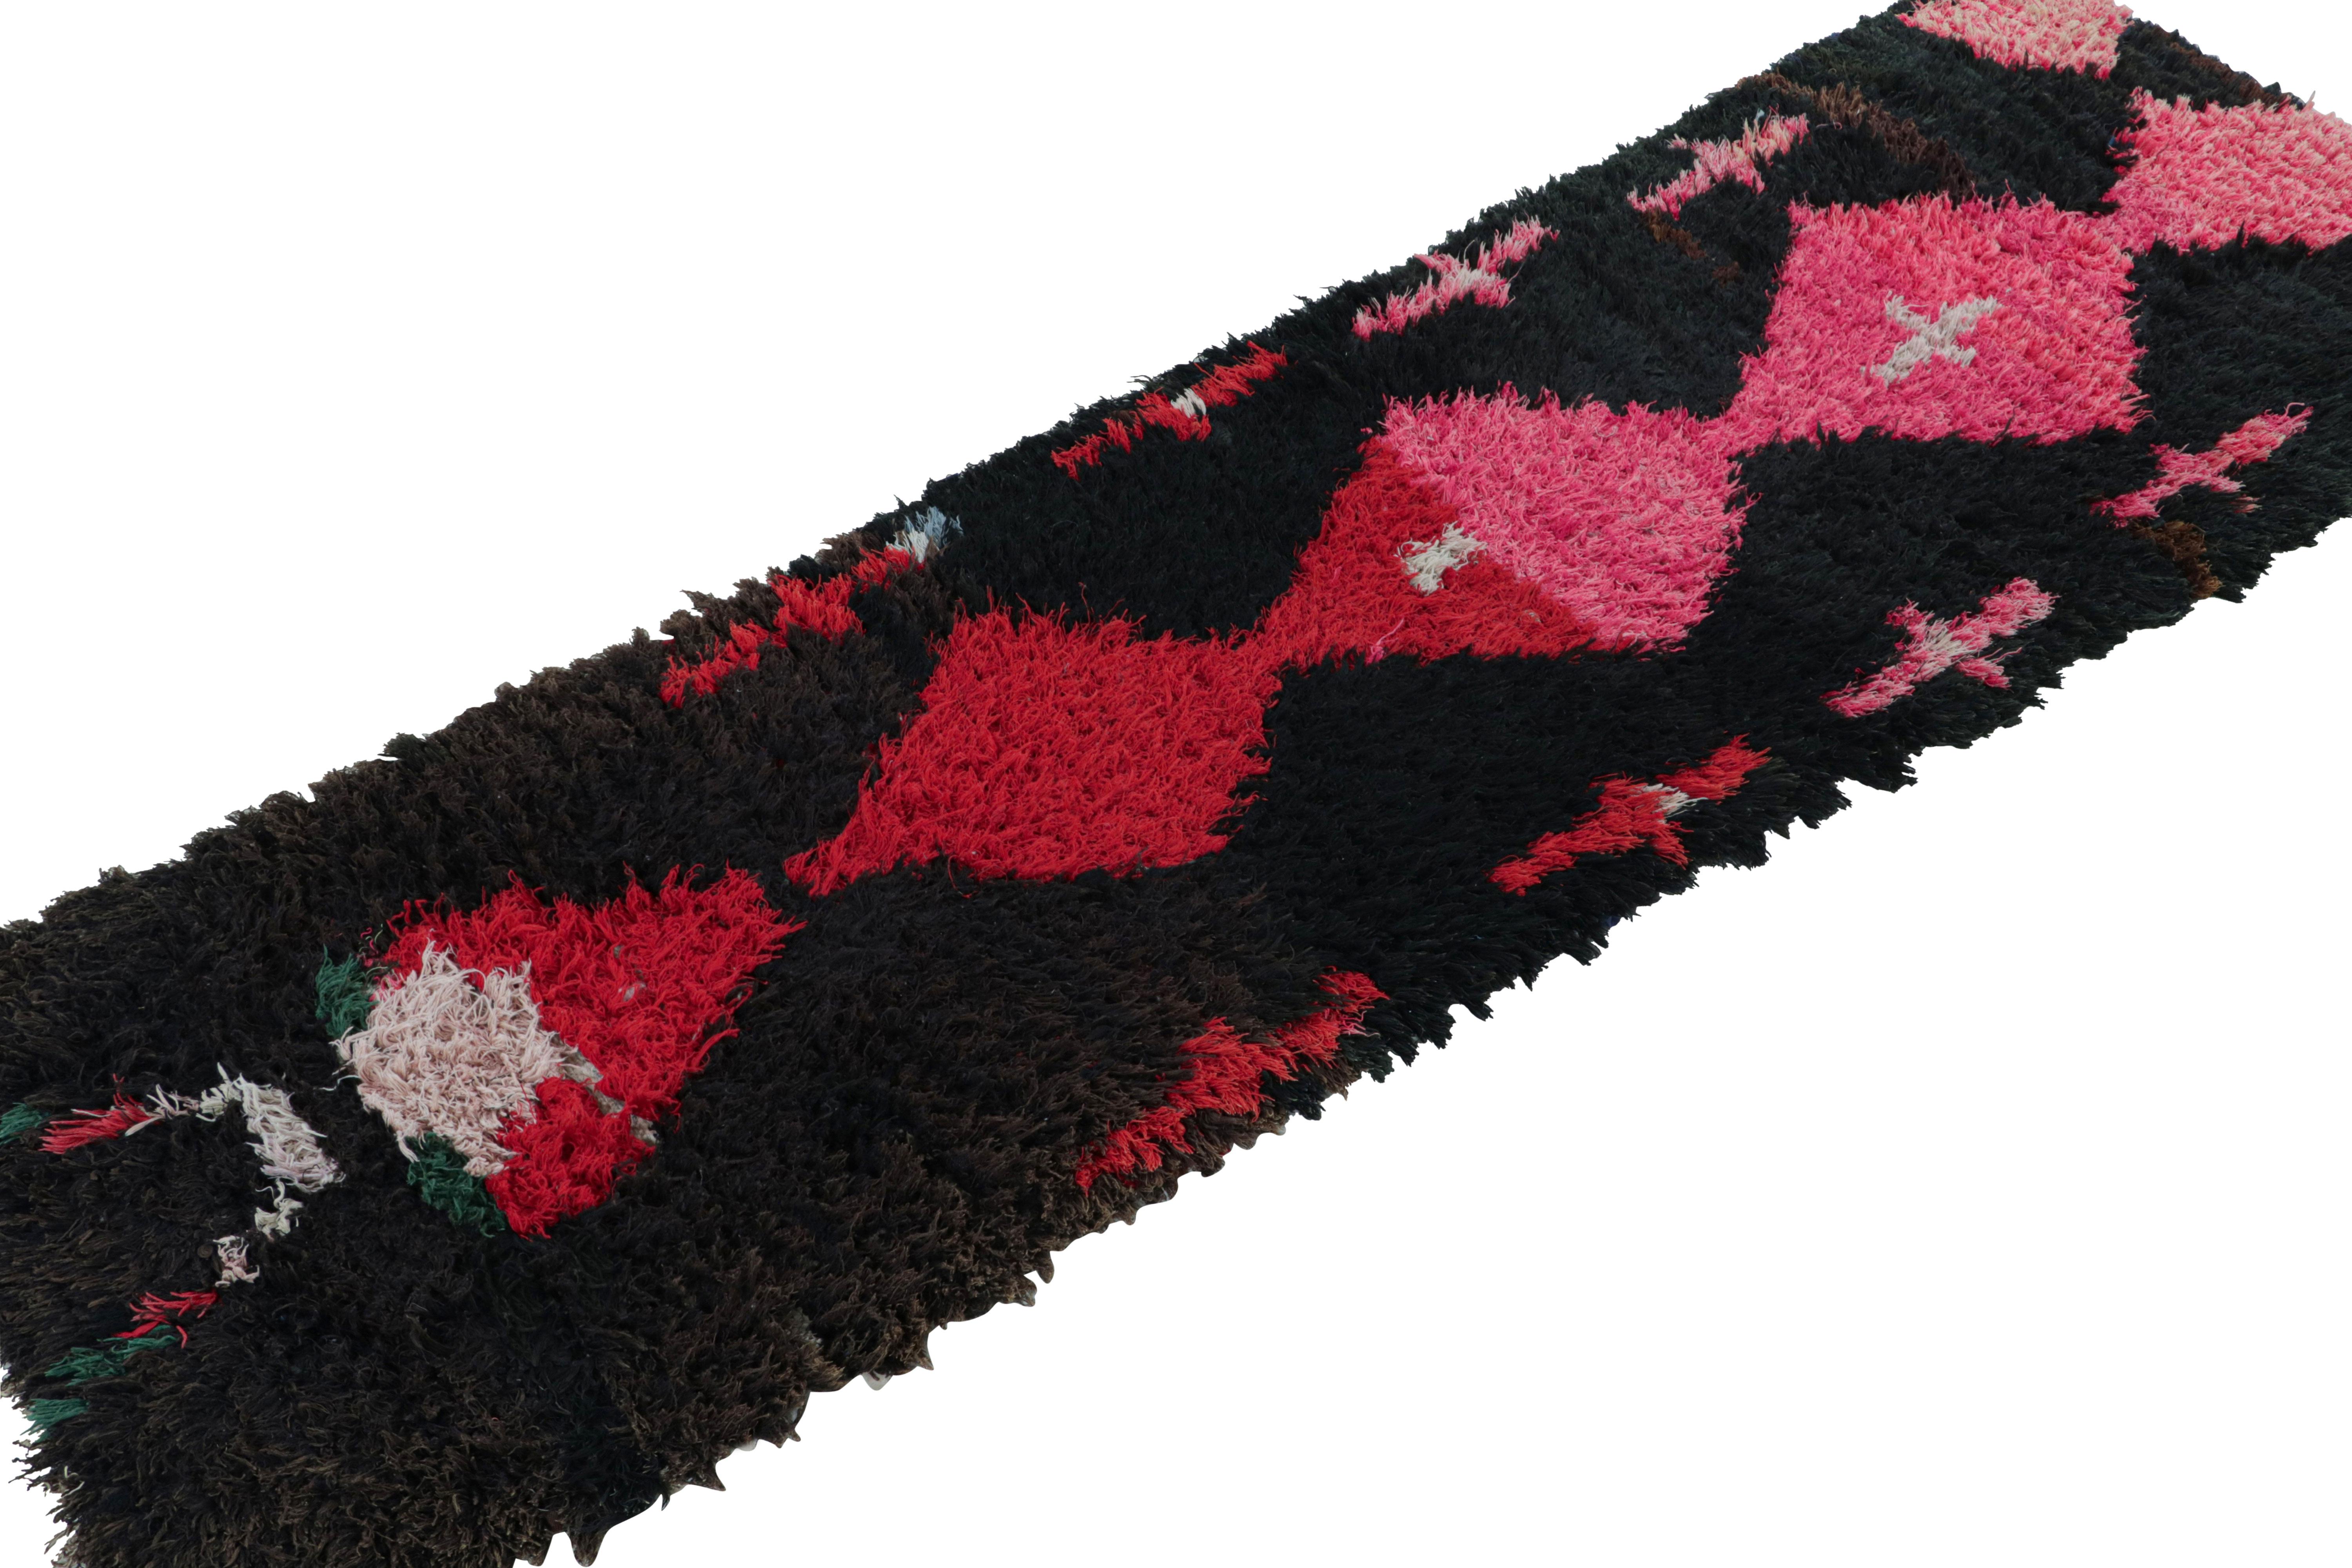 Hand-knotted in wool circa 1950-1960, this 2x8 vintage Moroccan runner rug with diamond medallions on a black field, hails from the Azilal tribe.  

On the Design: 

This piece enjoys a lush high pile with primitivist Berber geometric diamond